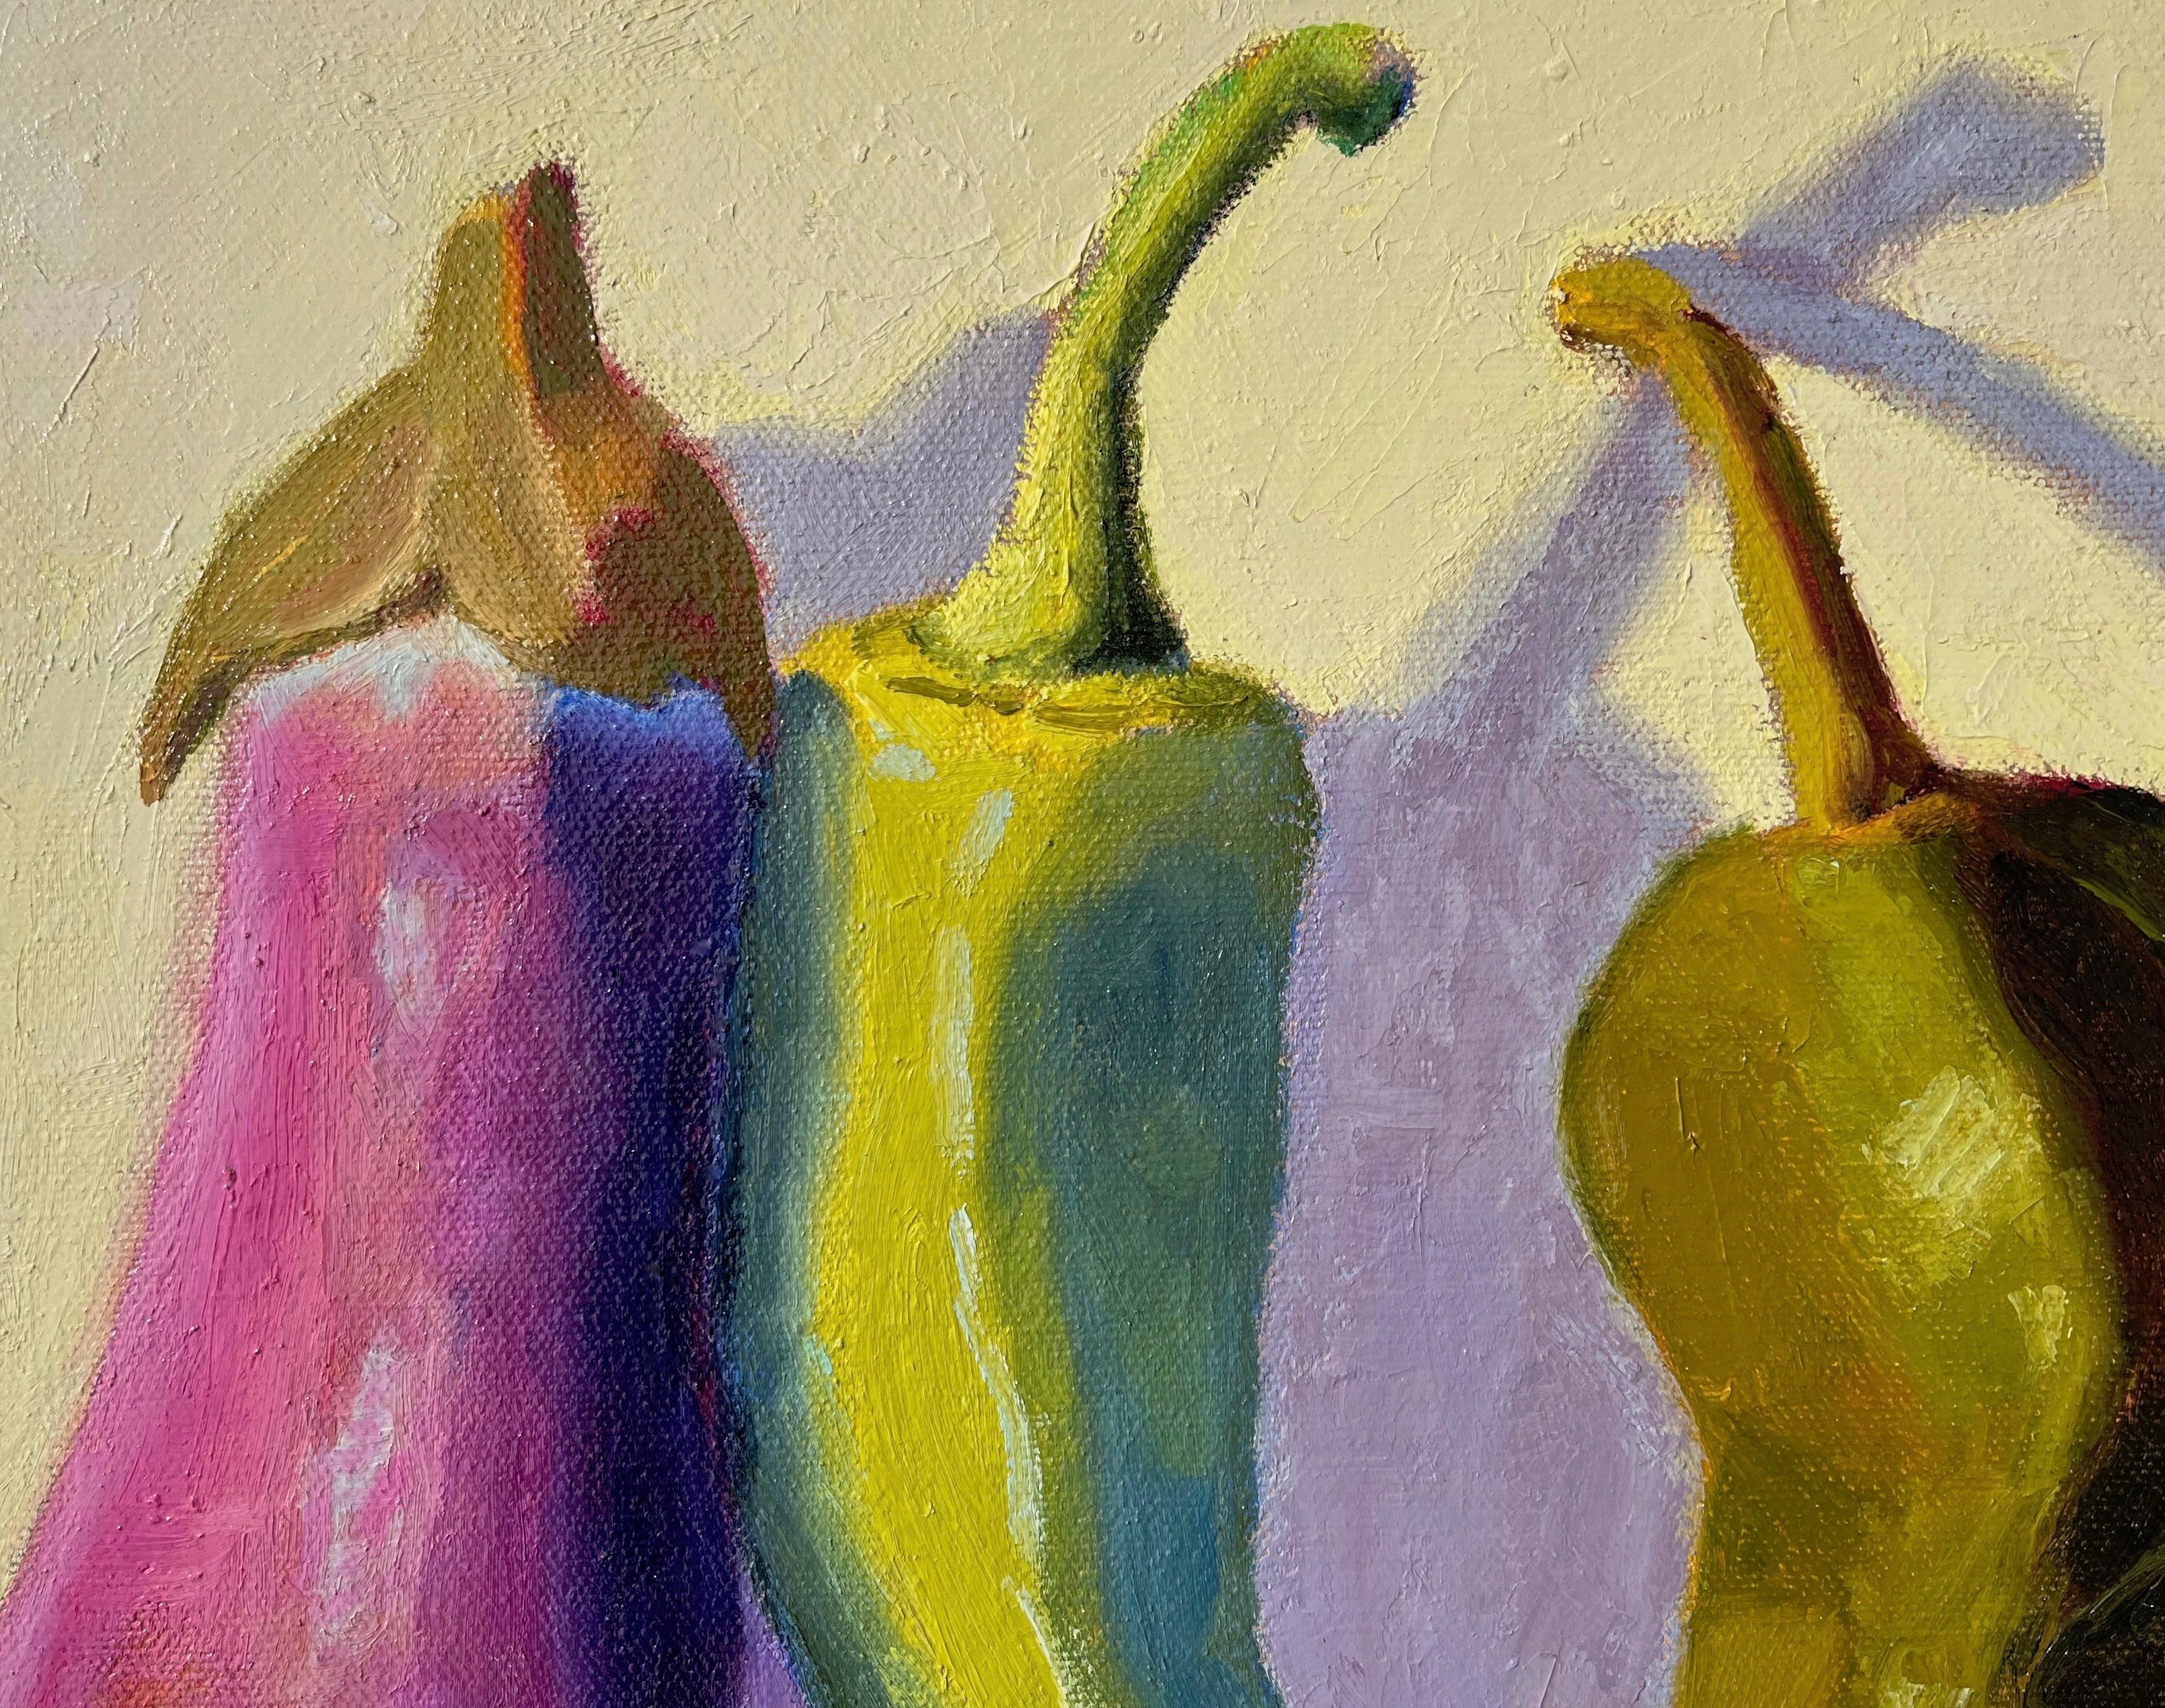 Eggplant and Peppers, Oil Painting 1